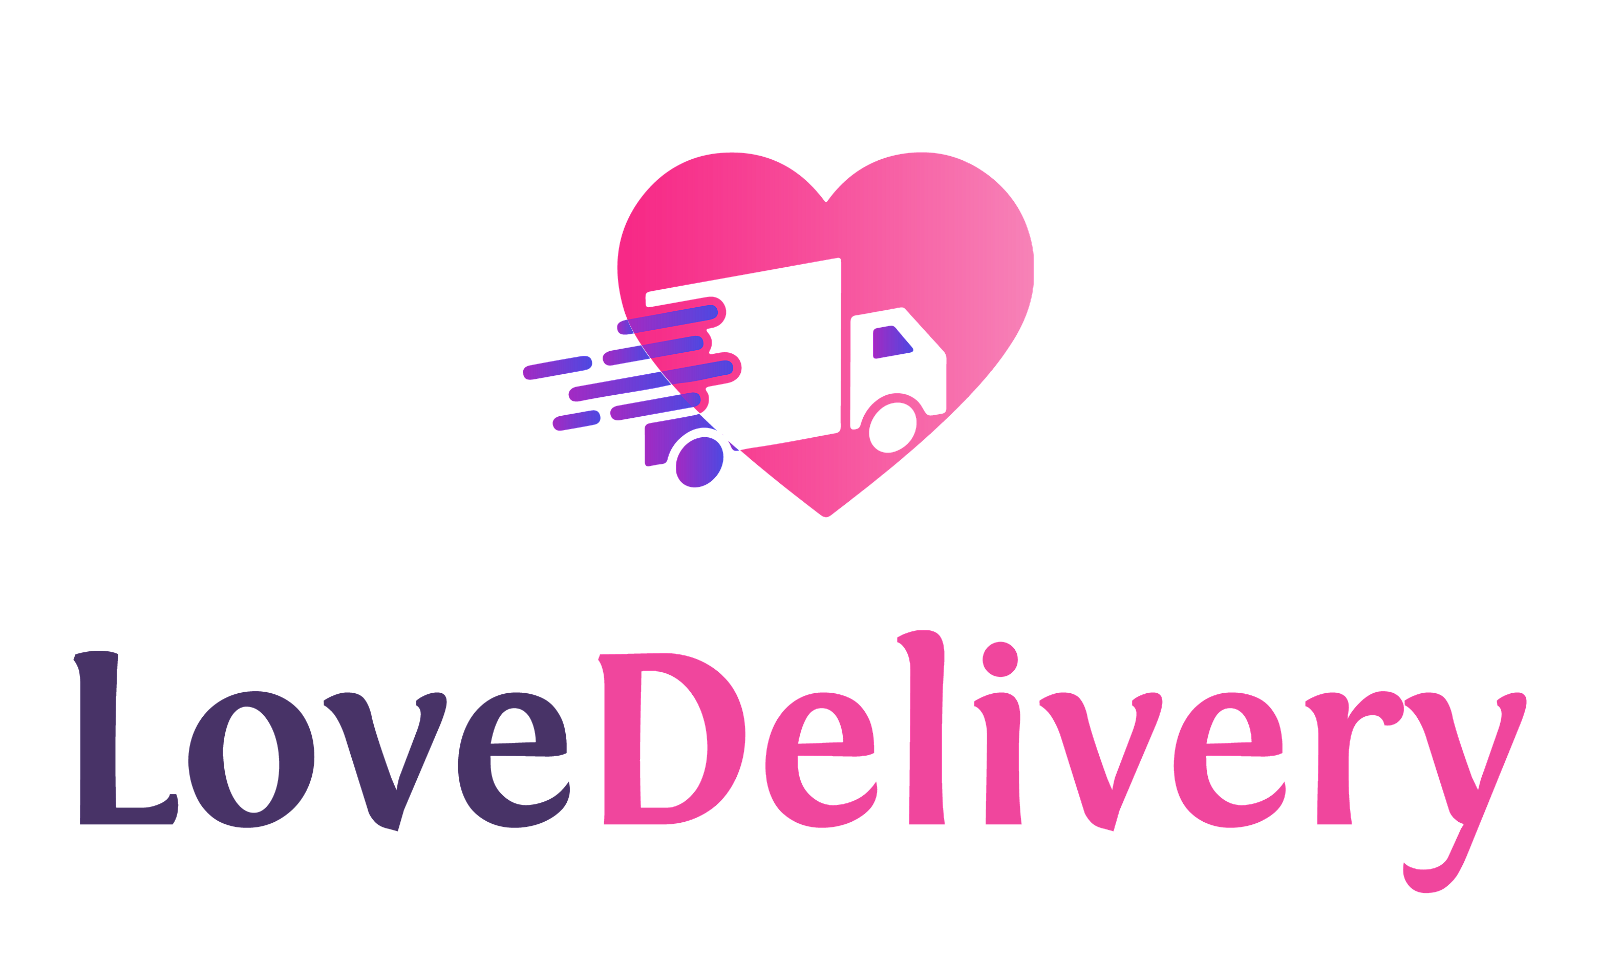 LoveDelivery.com - Creative brandable domain for sale